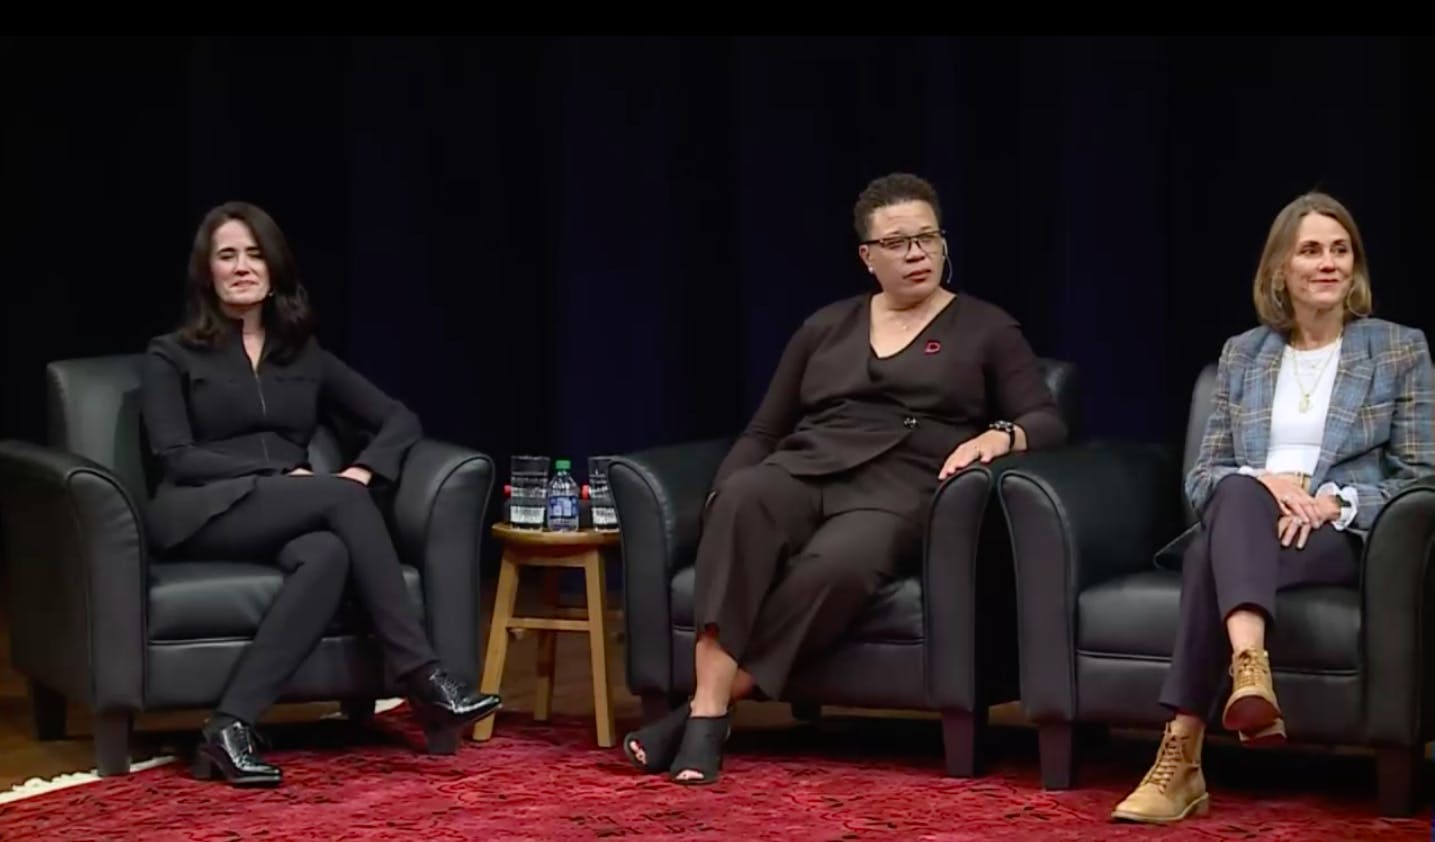 <p>From left to right, Angela Cinefro, Trina Scott and Brenda Becker speak at the &quot;The Future of Work and Leadership&quot; panel. Photo originally from WKAR livestream on Sept. 30, 2021.</p>